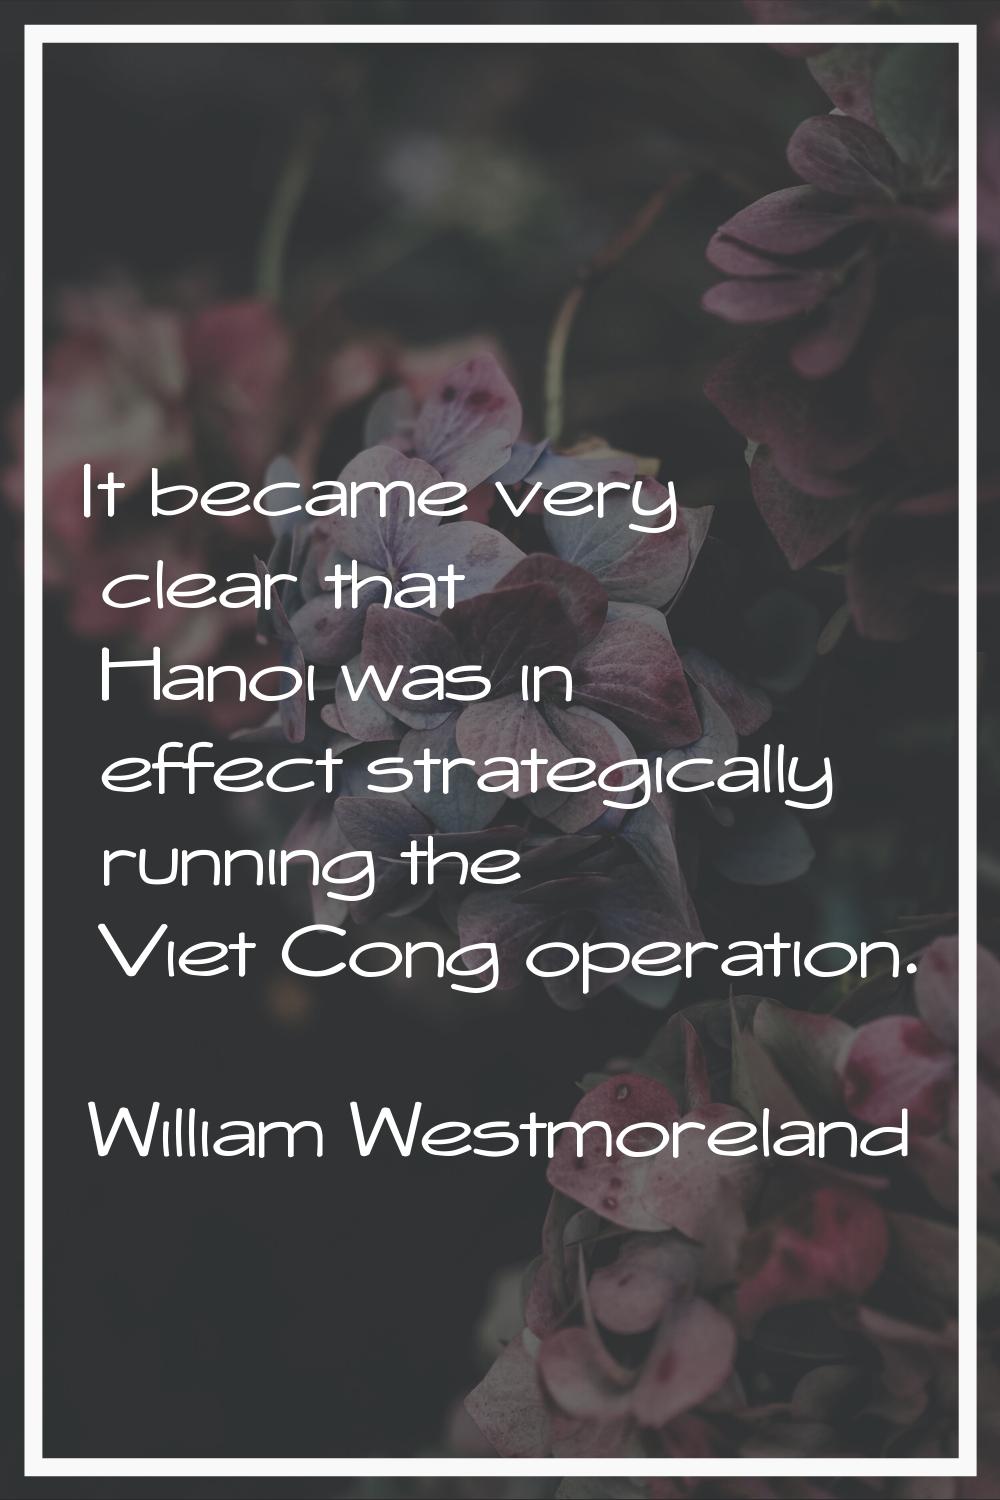 It became very clear that Hanoi was in effect strategically running the Viet Cong operation.